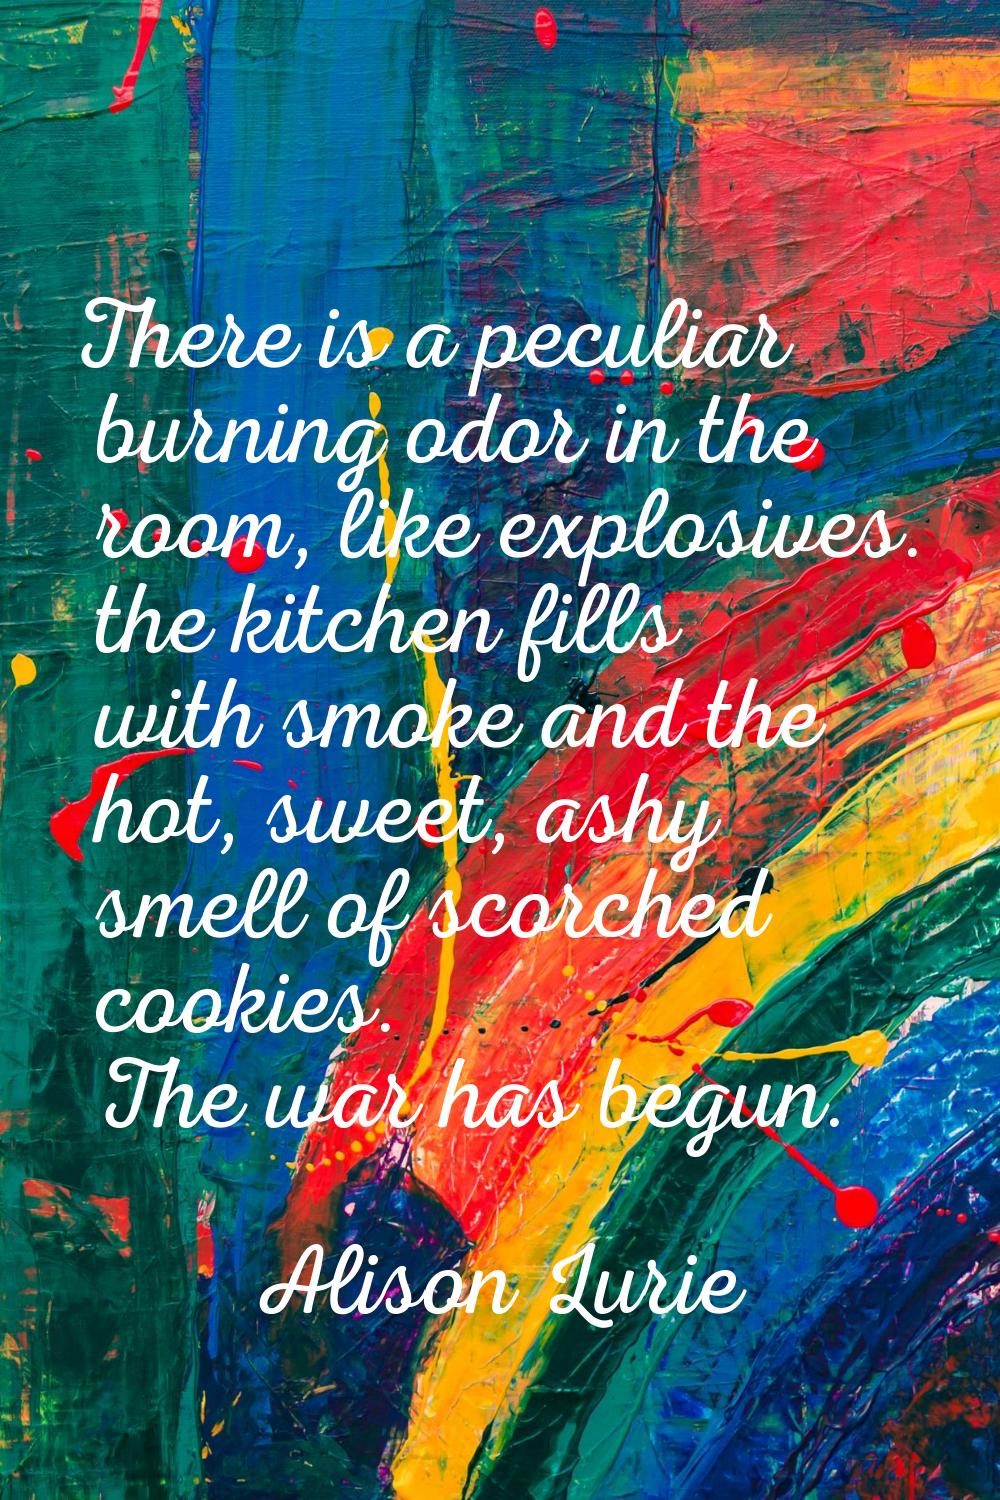 There is a peculiar burning odor in the room, like explosives. the kitchen fills with smoke and the